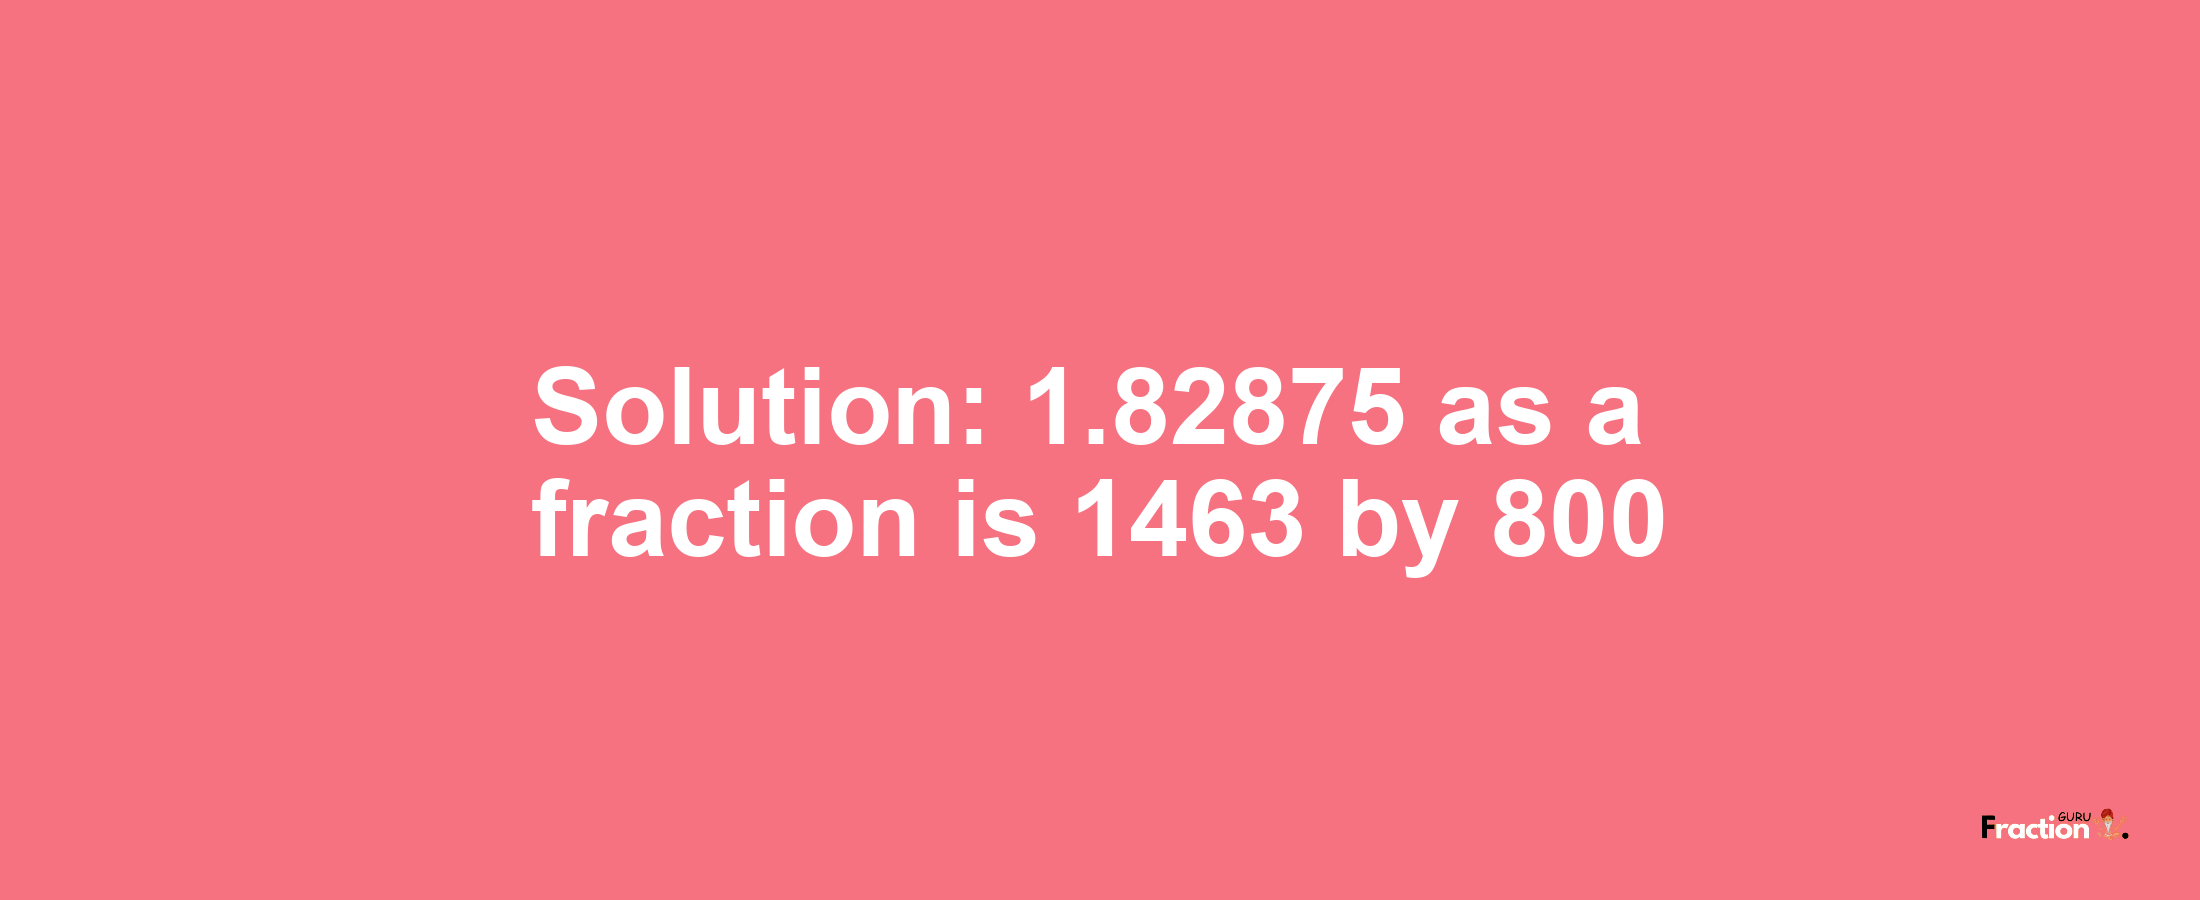 Solution:1.82875 as a fraction is 1463/800